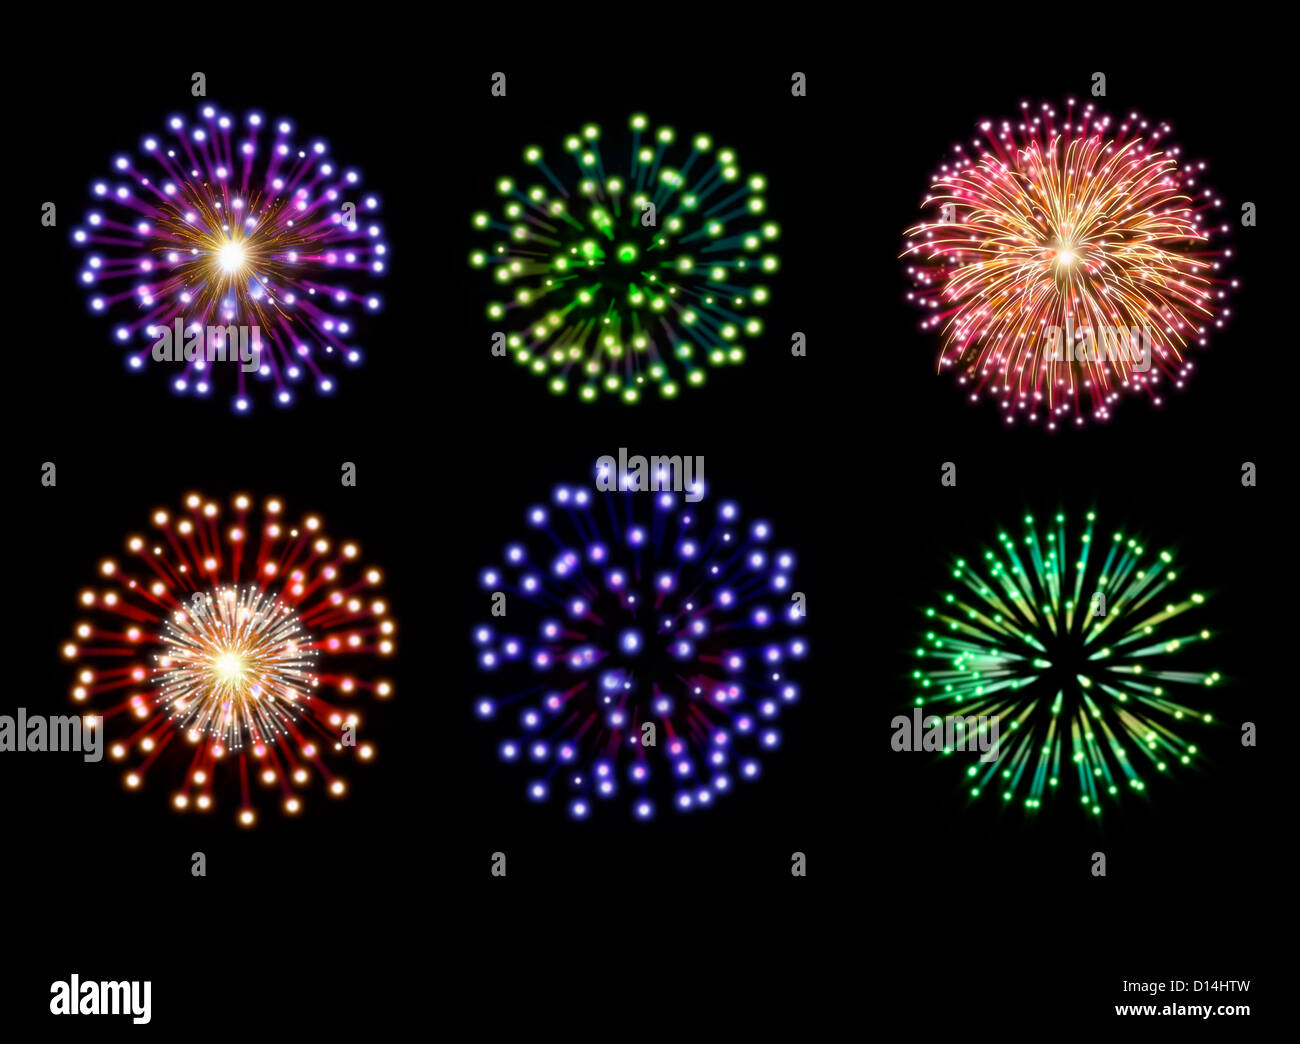 Collection of colorful fireworks, sparklers, salute and petards explosions. Design elements isolated over black background Stock Photo